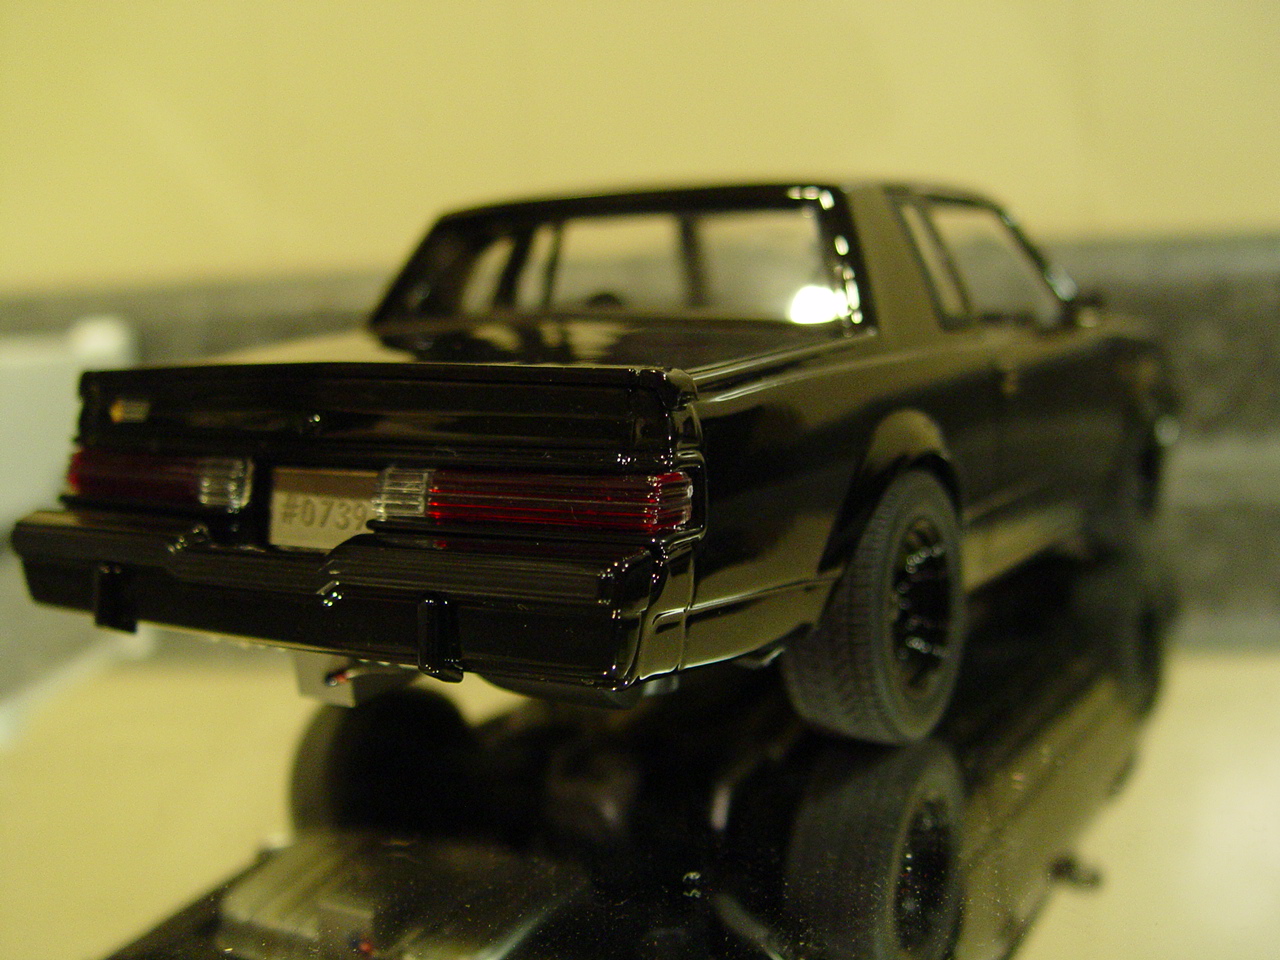 1:18 Scale GMP G1800226 Streetfighter Buick Grand National